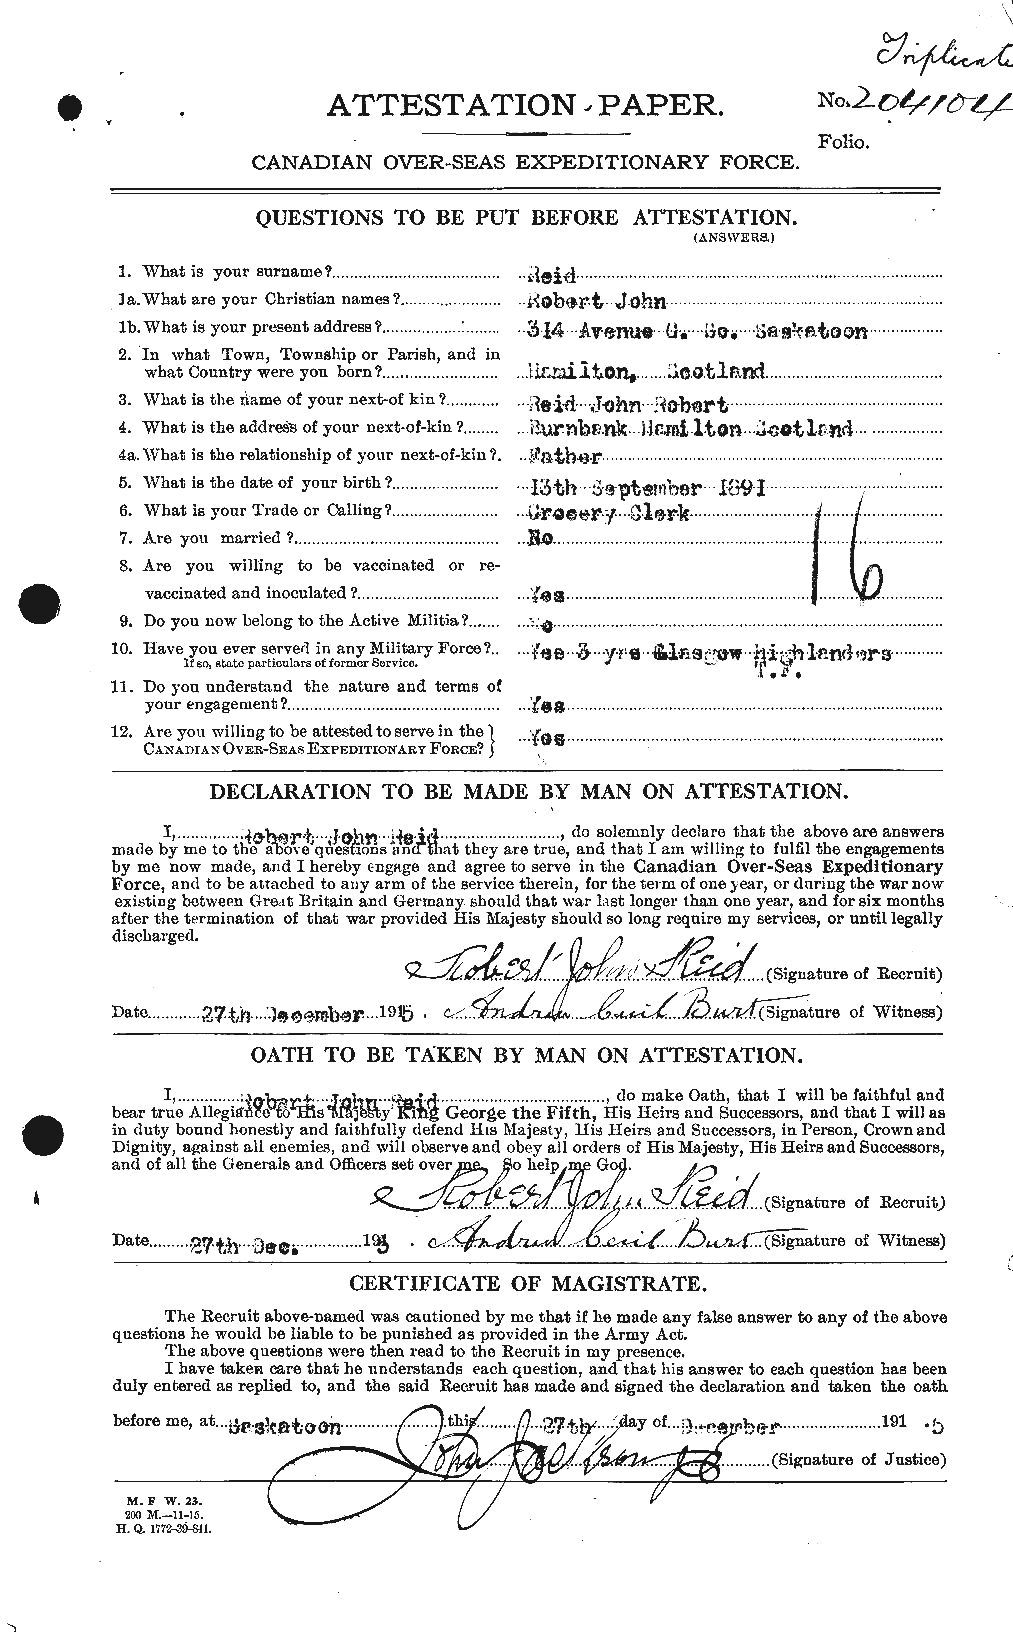 Personnel Records of the First World War - CEF 601910a